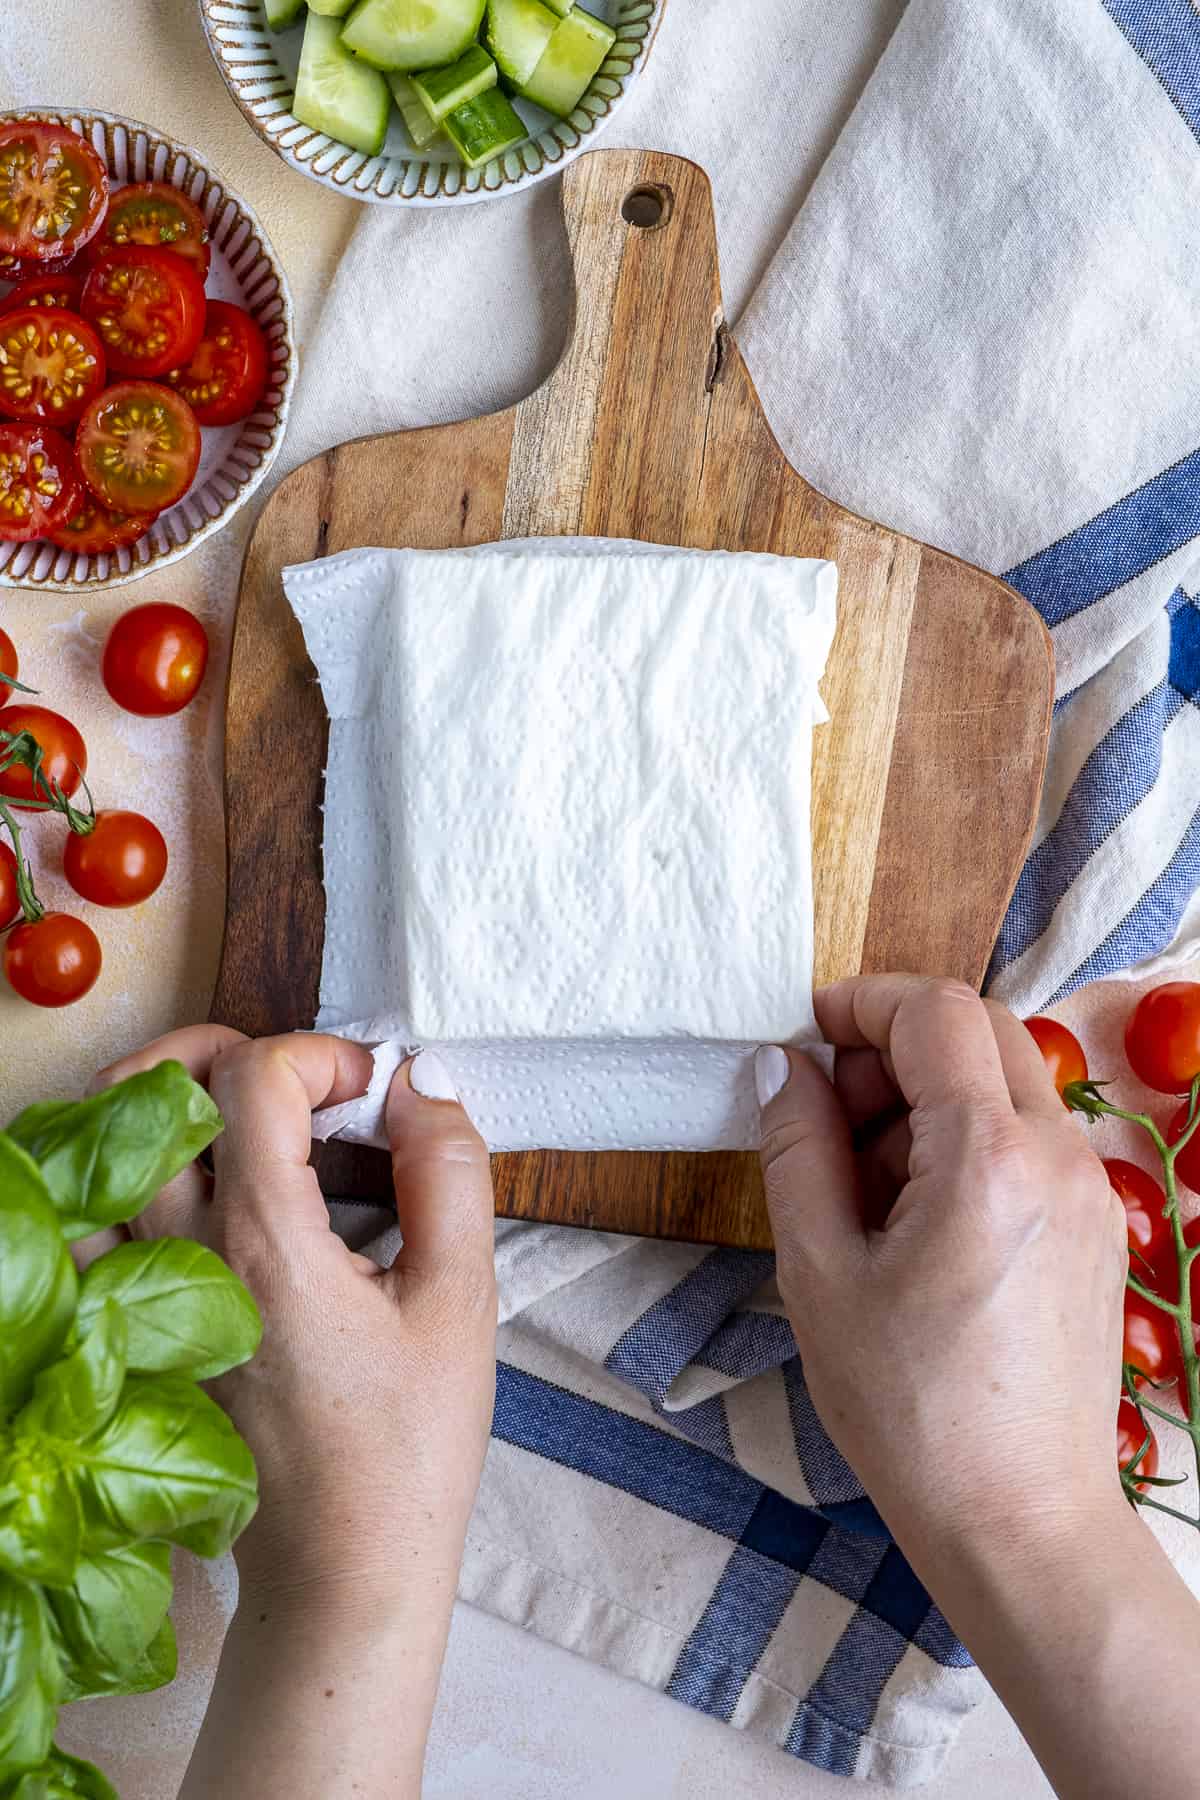 Hands wrapping a block of feta cheese with dampened paper towel. Sliced tomatoes, cucumber and fresh basil on the side.